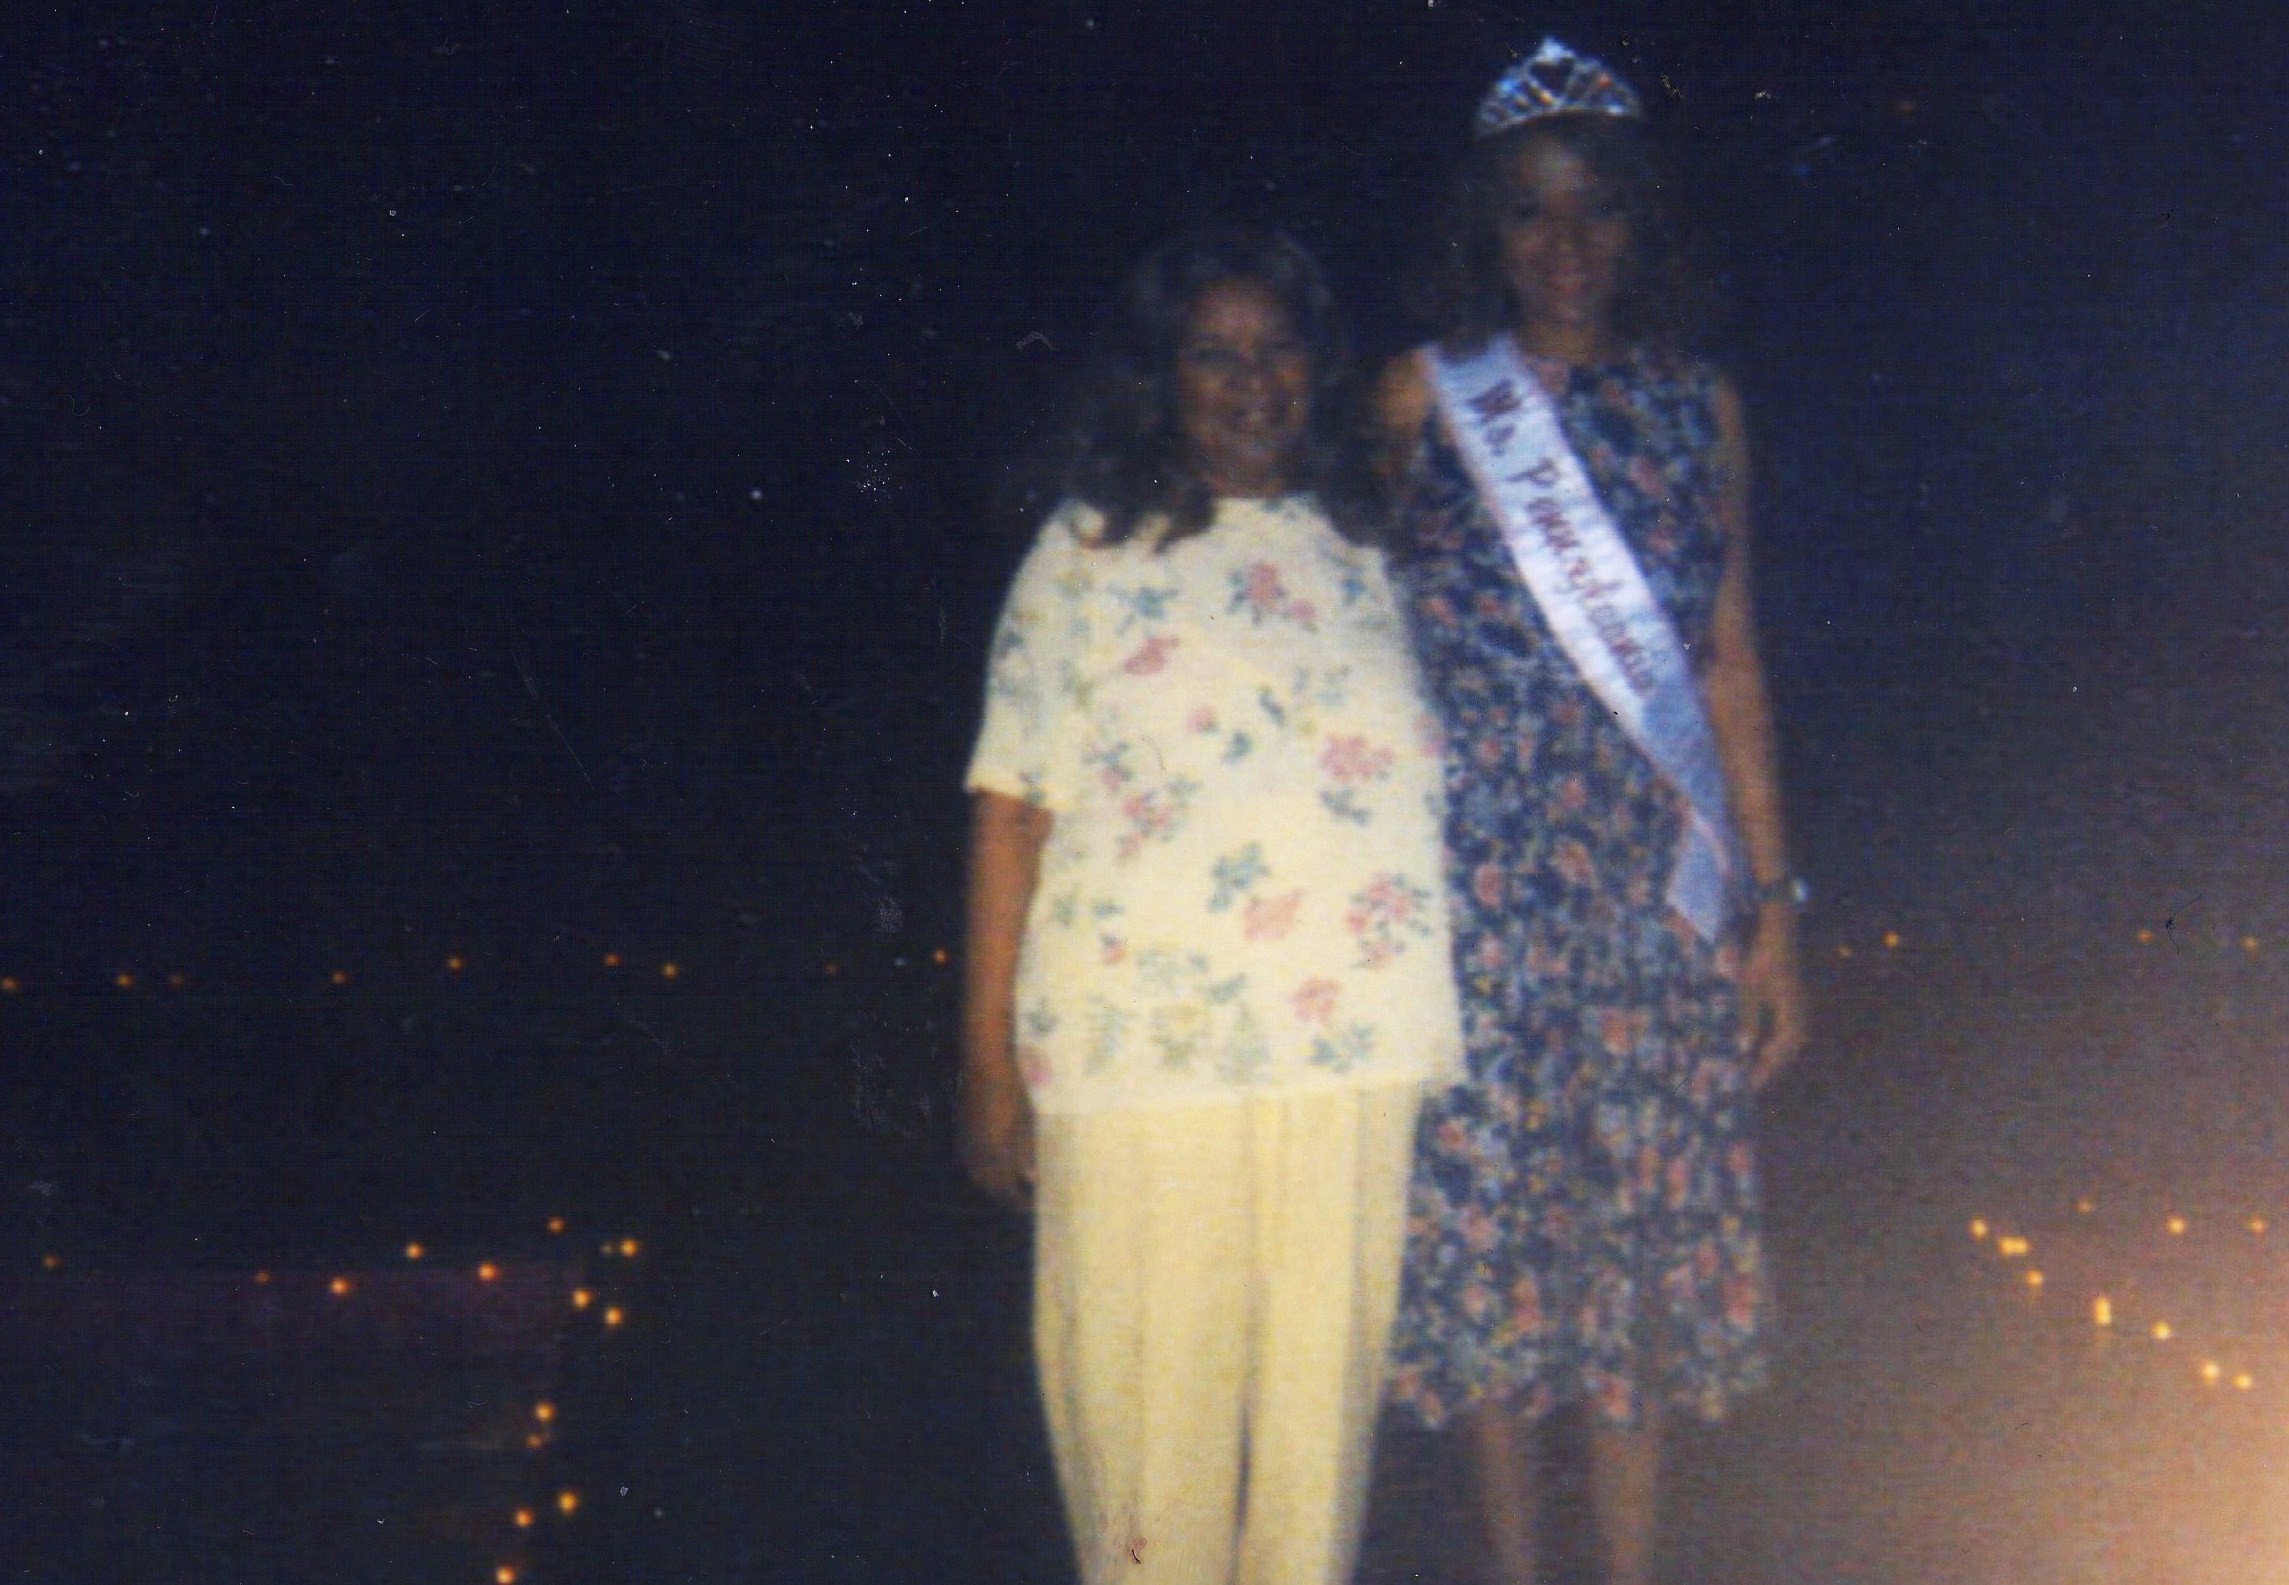 Ms. Pennsylvania 2004 Maria Frisby standing on the catwalk at her national pageant in Bloomingdale, Illinois.